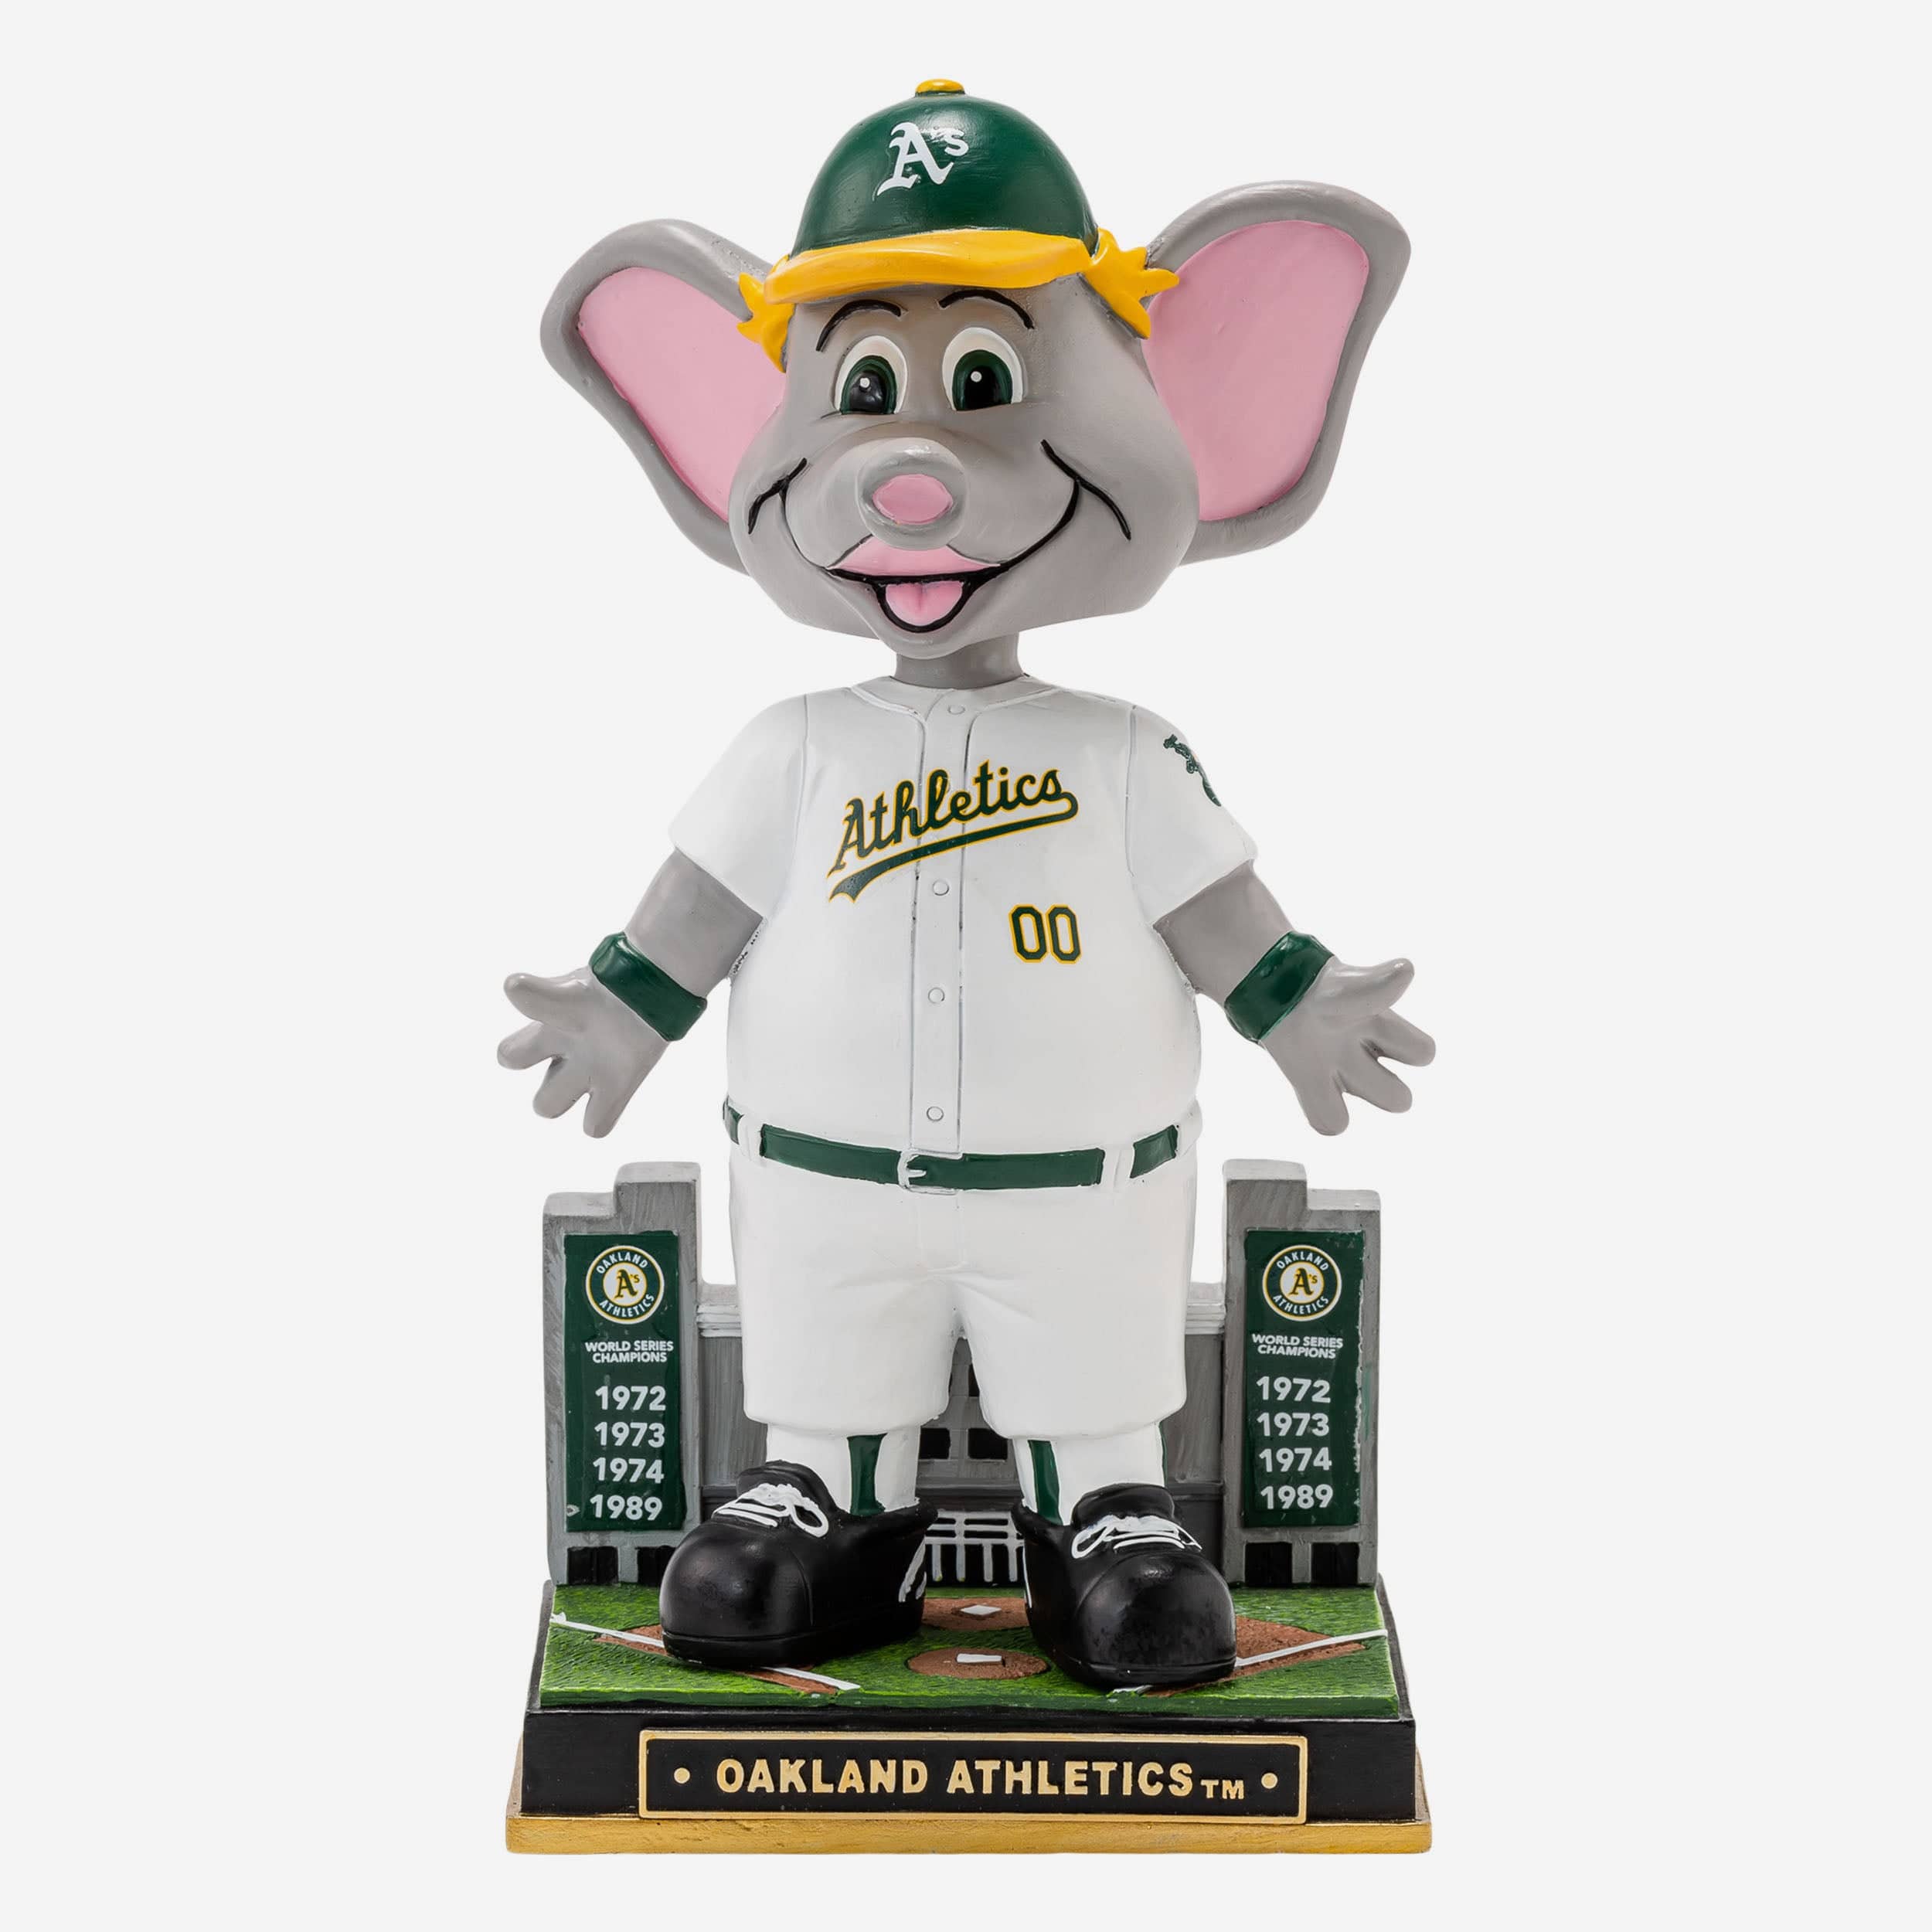 Stomper Oakland Athletics Gate Series Mascot Bobblehead Officially Licensed by MLB